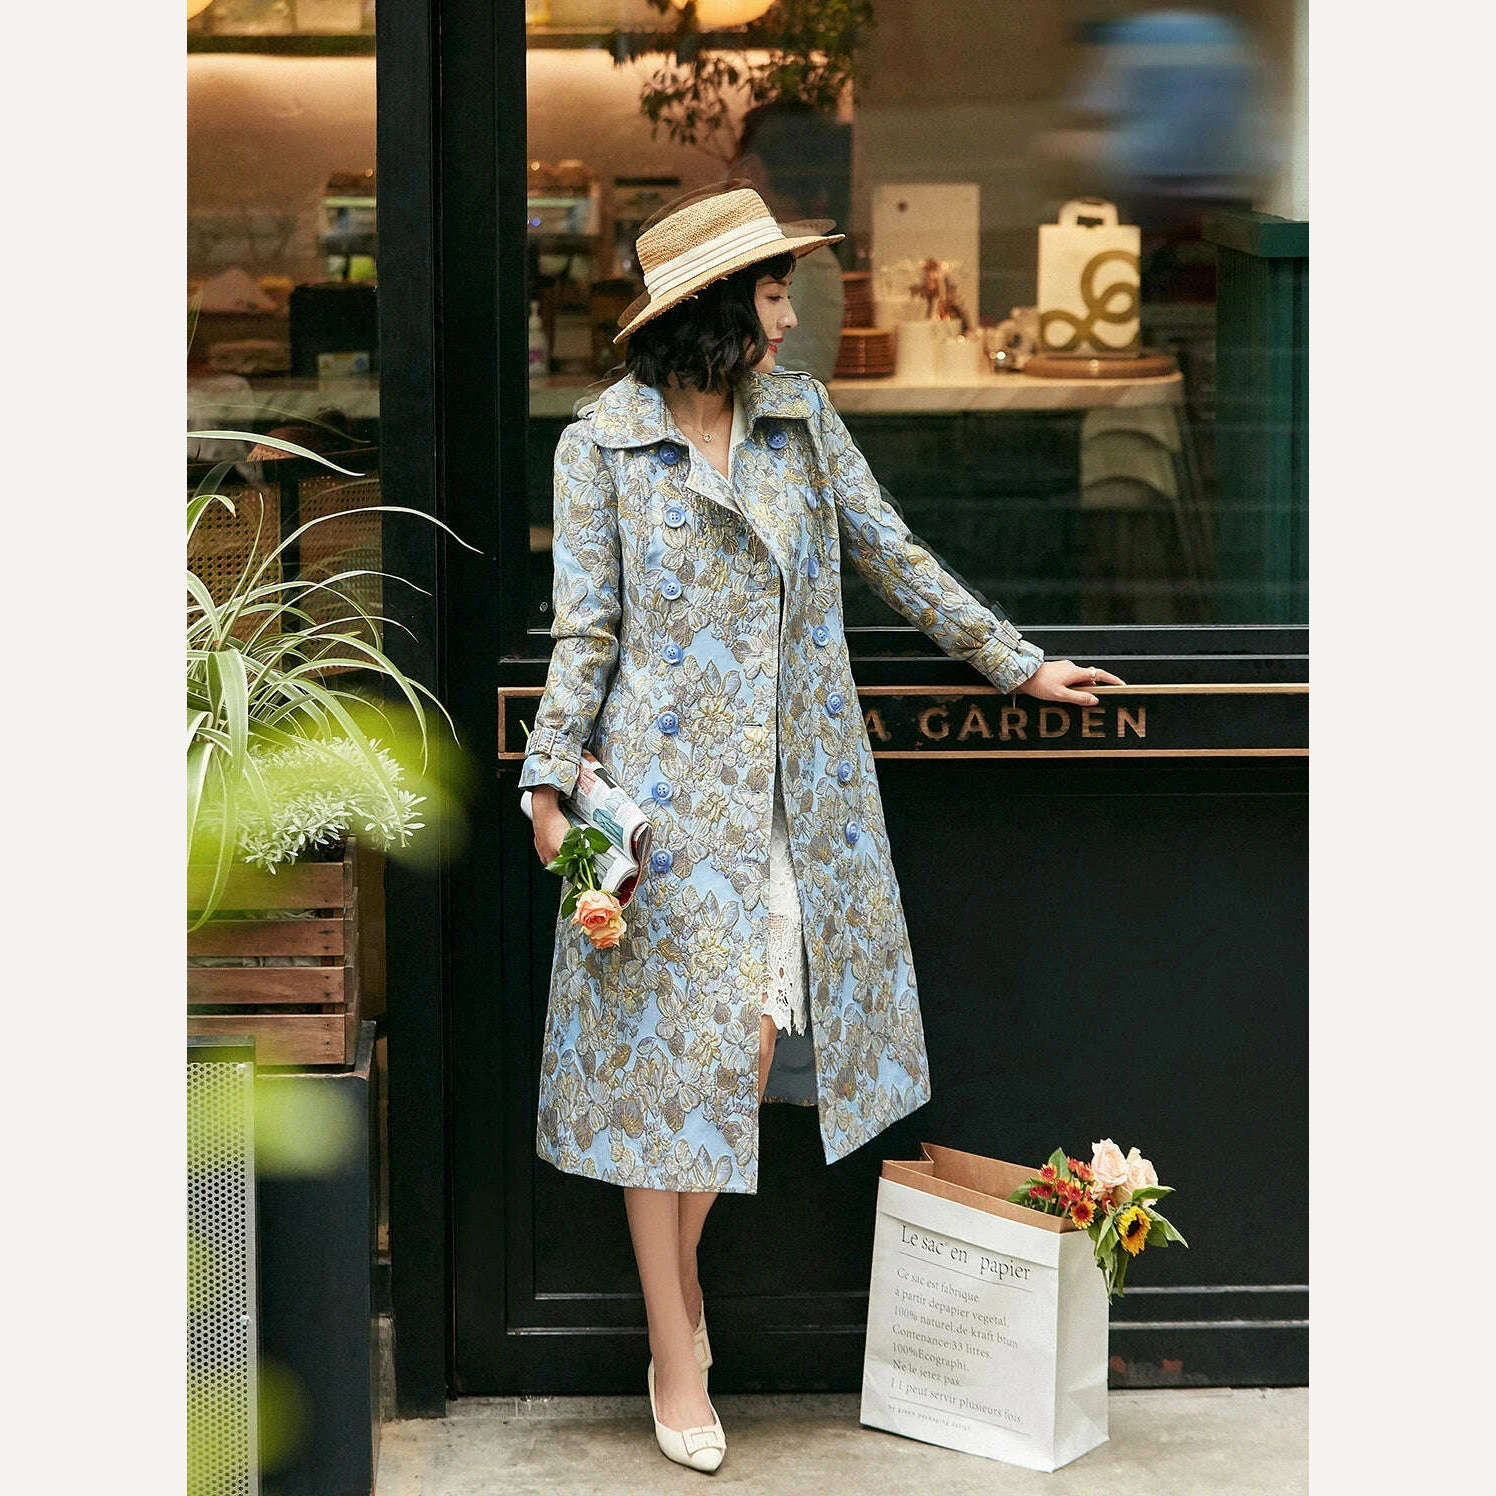 KIMLUD, England Style Trench Women Jacquard Coat Winter Double Breasted Long Coat Luxury Jacket Oversized Overcoat Turn-down Collar, KIMLUD Womens Clothes